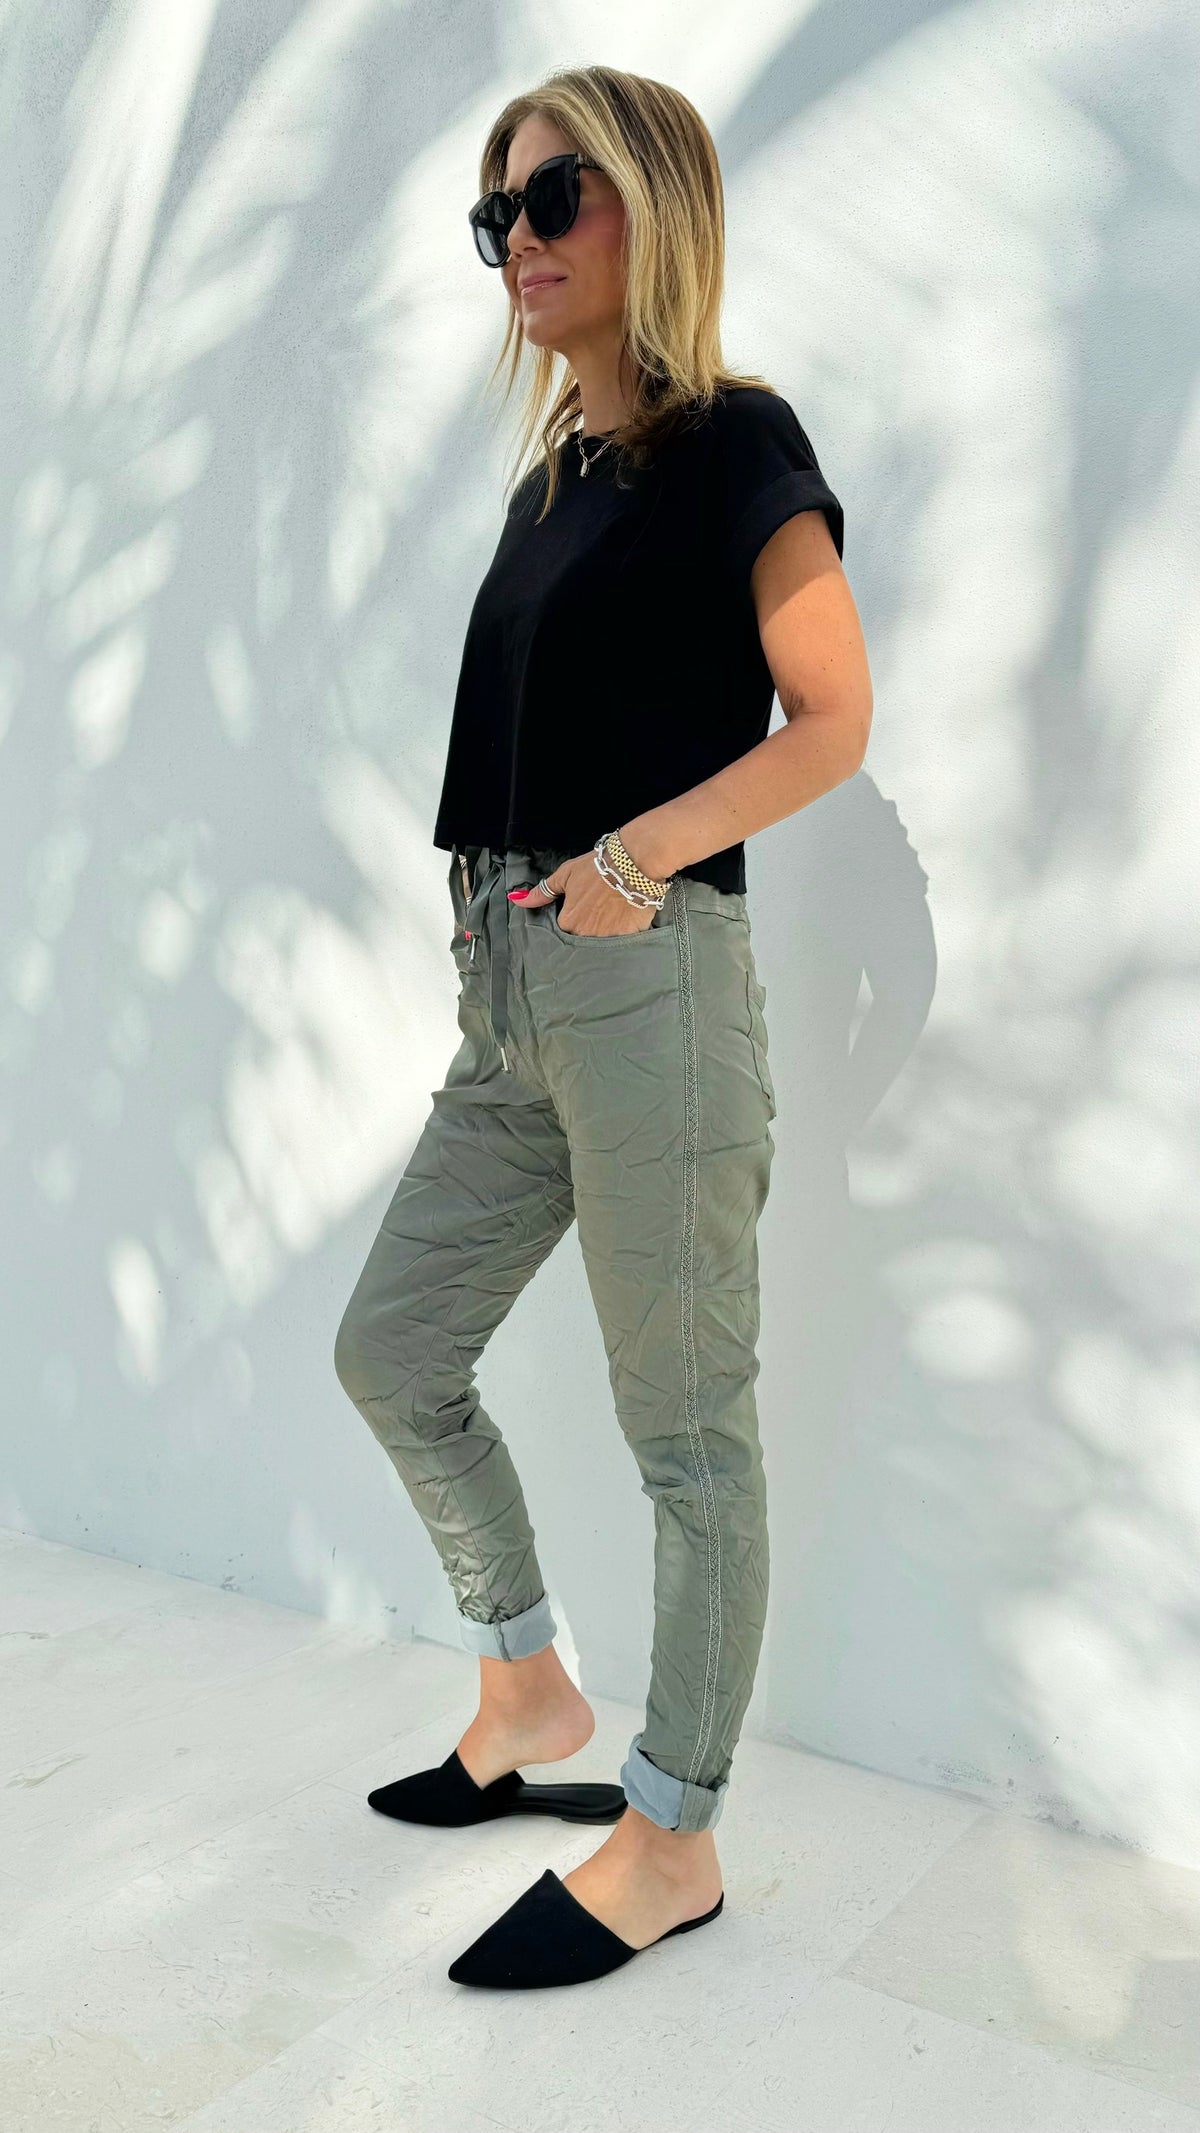 Italian Wish List Braided Jogger - Army Green-180 Joggers-Italianissimo-Coastal Bloom Boutique, find the trendiest versions of the popular styles and looks Located in Indialantic, FL